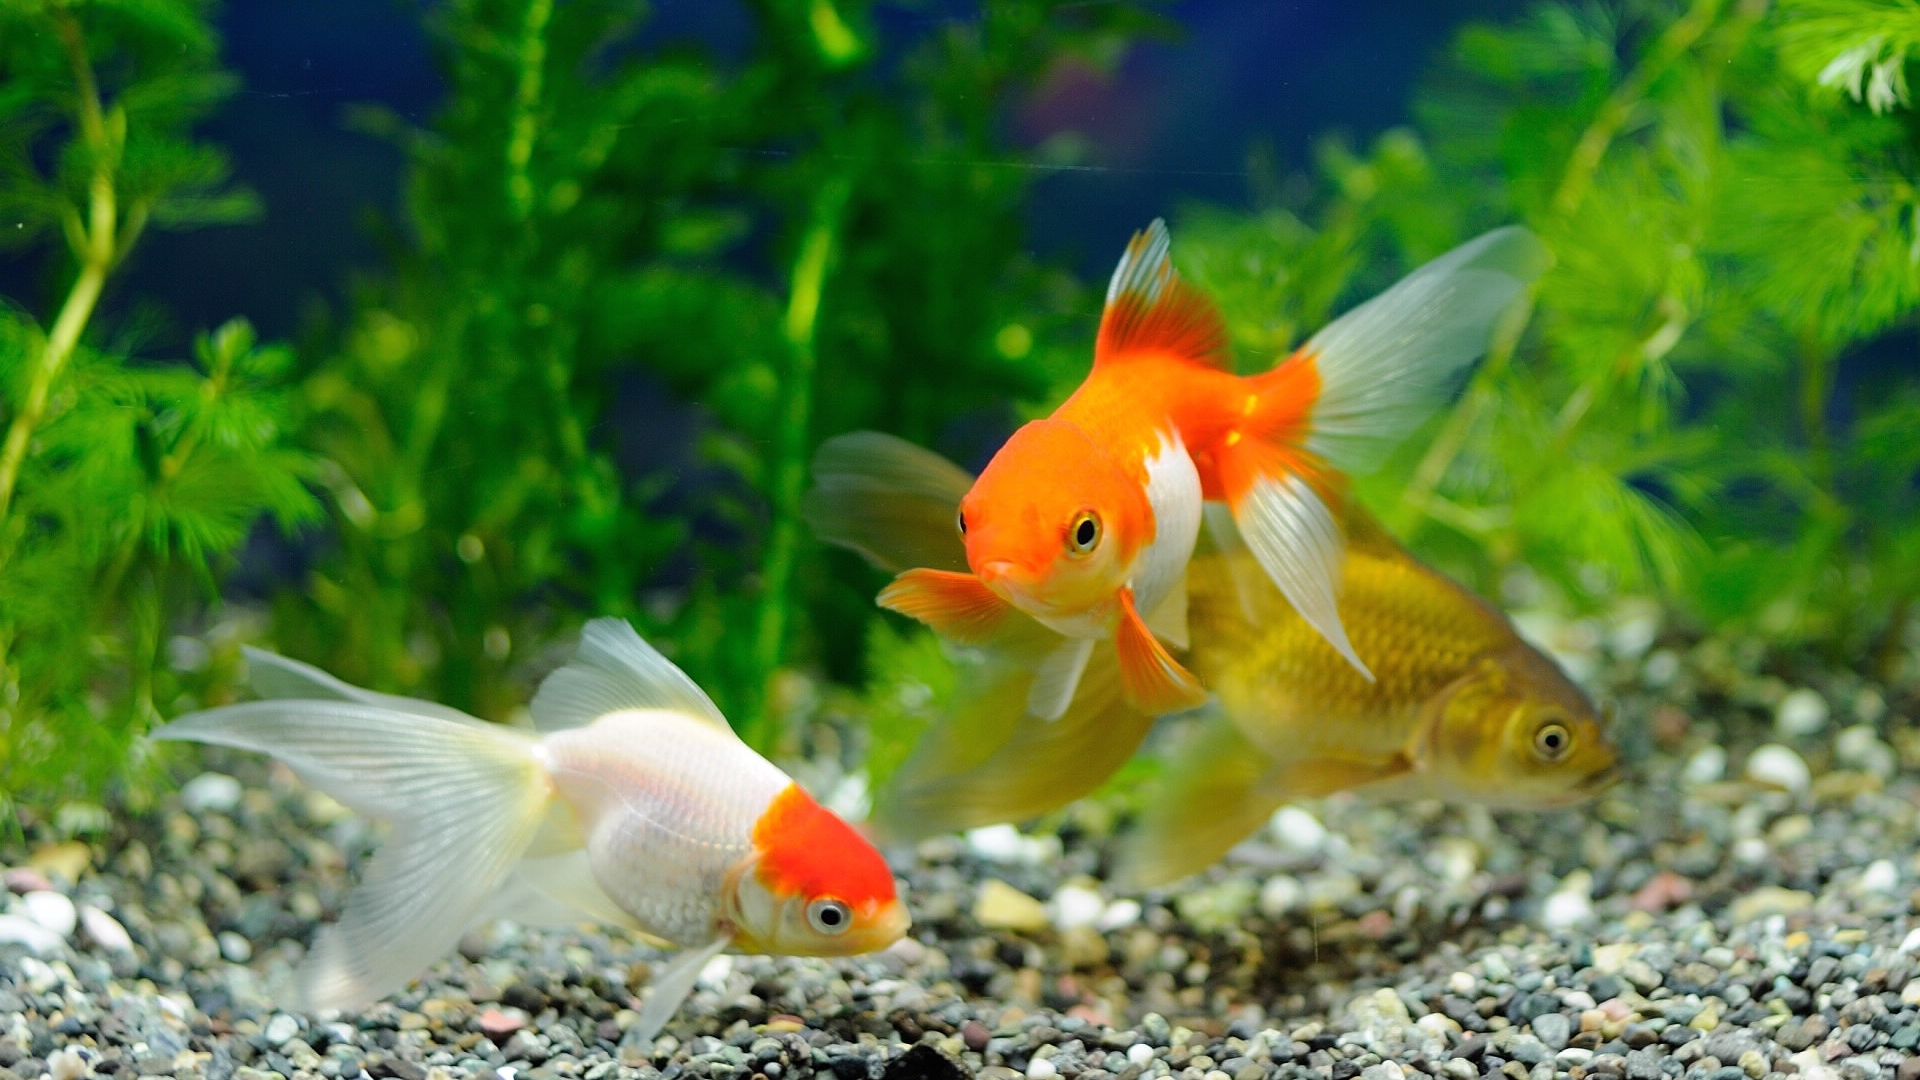 Desktop Wallpaper Beautiful Fishes In Aquarium, Hd Image, Picture,  Background, To Upc